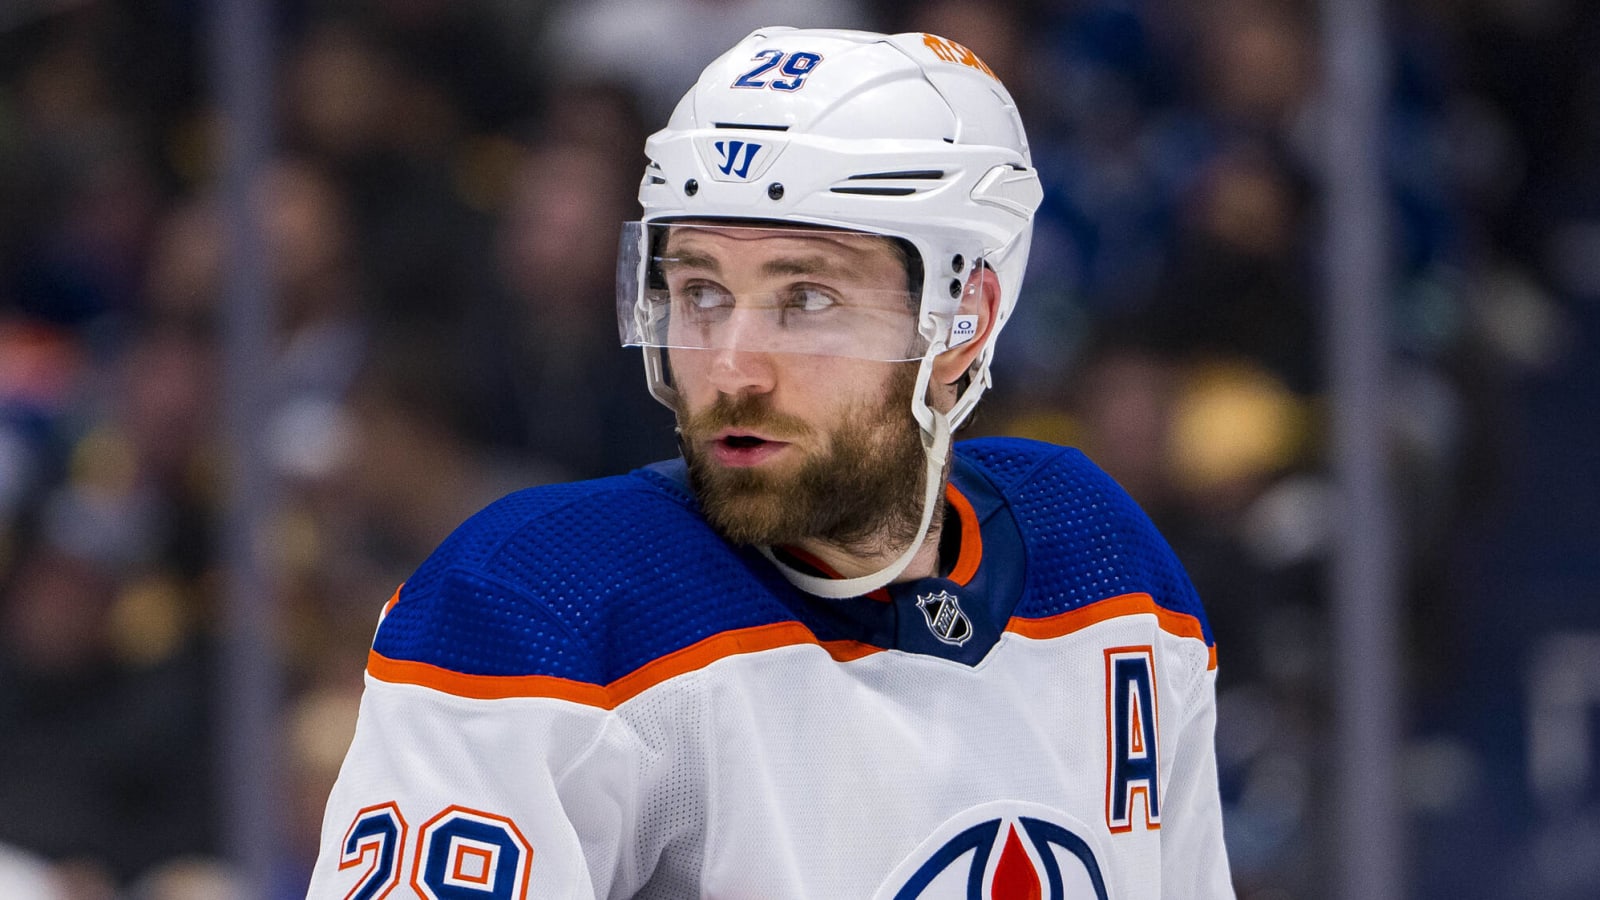 Series wrap-up: four points on four goals for Draisaitl… who wasn’t even supposed to play